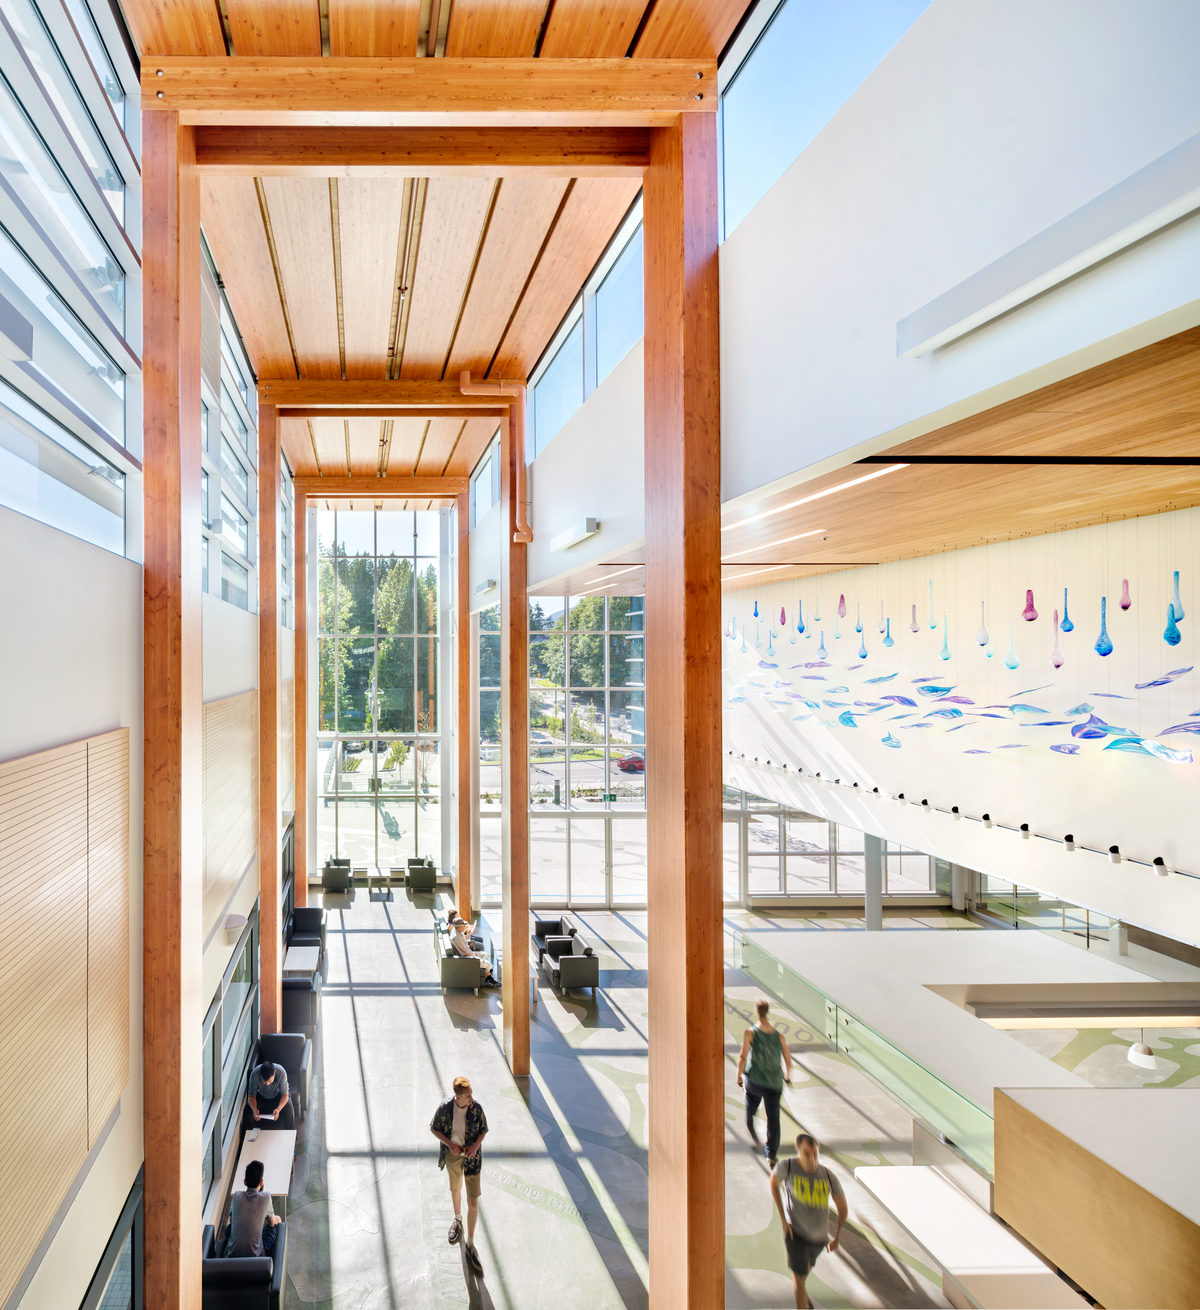 Interior sunny daytime view of people within main lobby of Delbrook Community Recreation Centre which features full glass frontage, and full height Glue-laminated timber (Glulam) columns and beams supporting wood building 'spine'